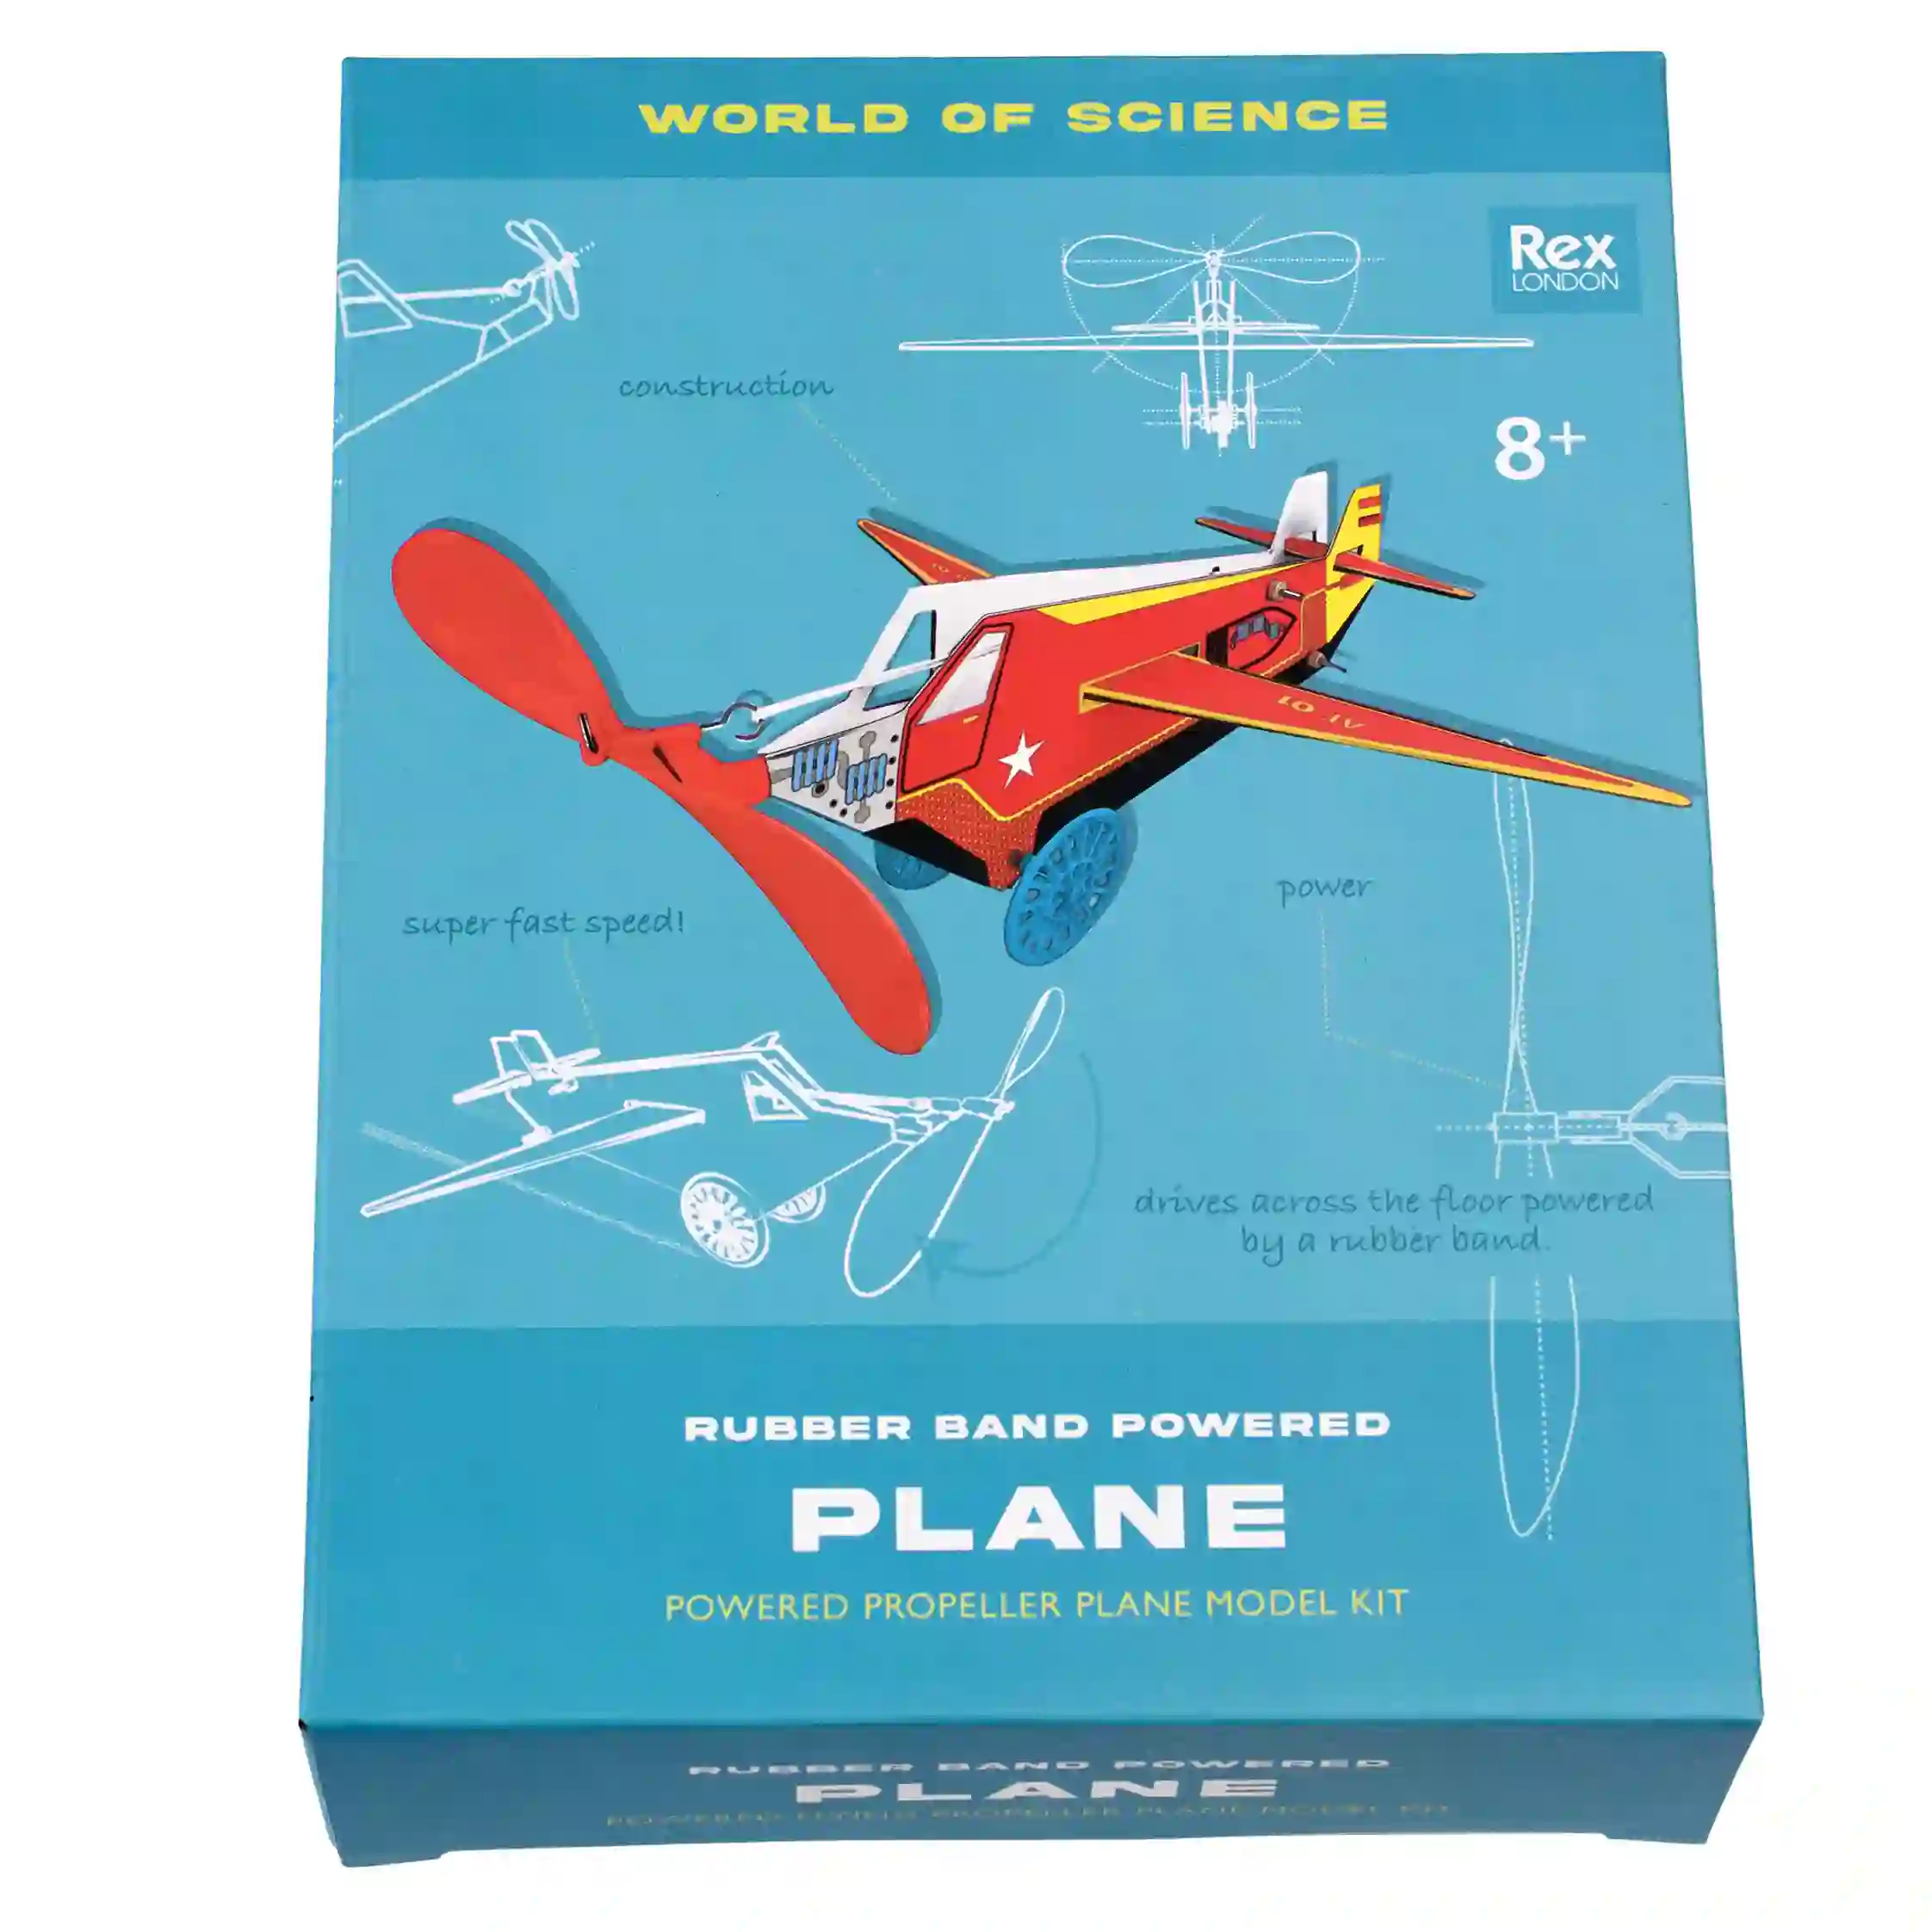 make your own rubber band-powered plane